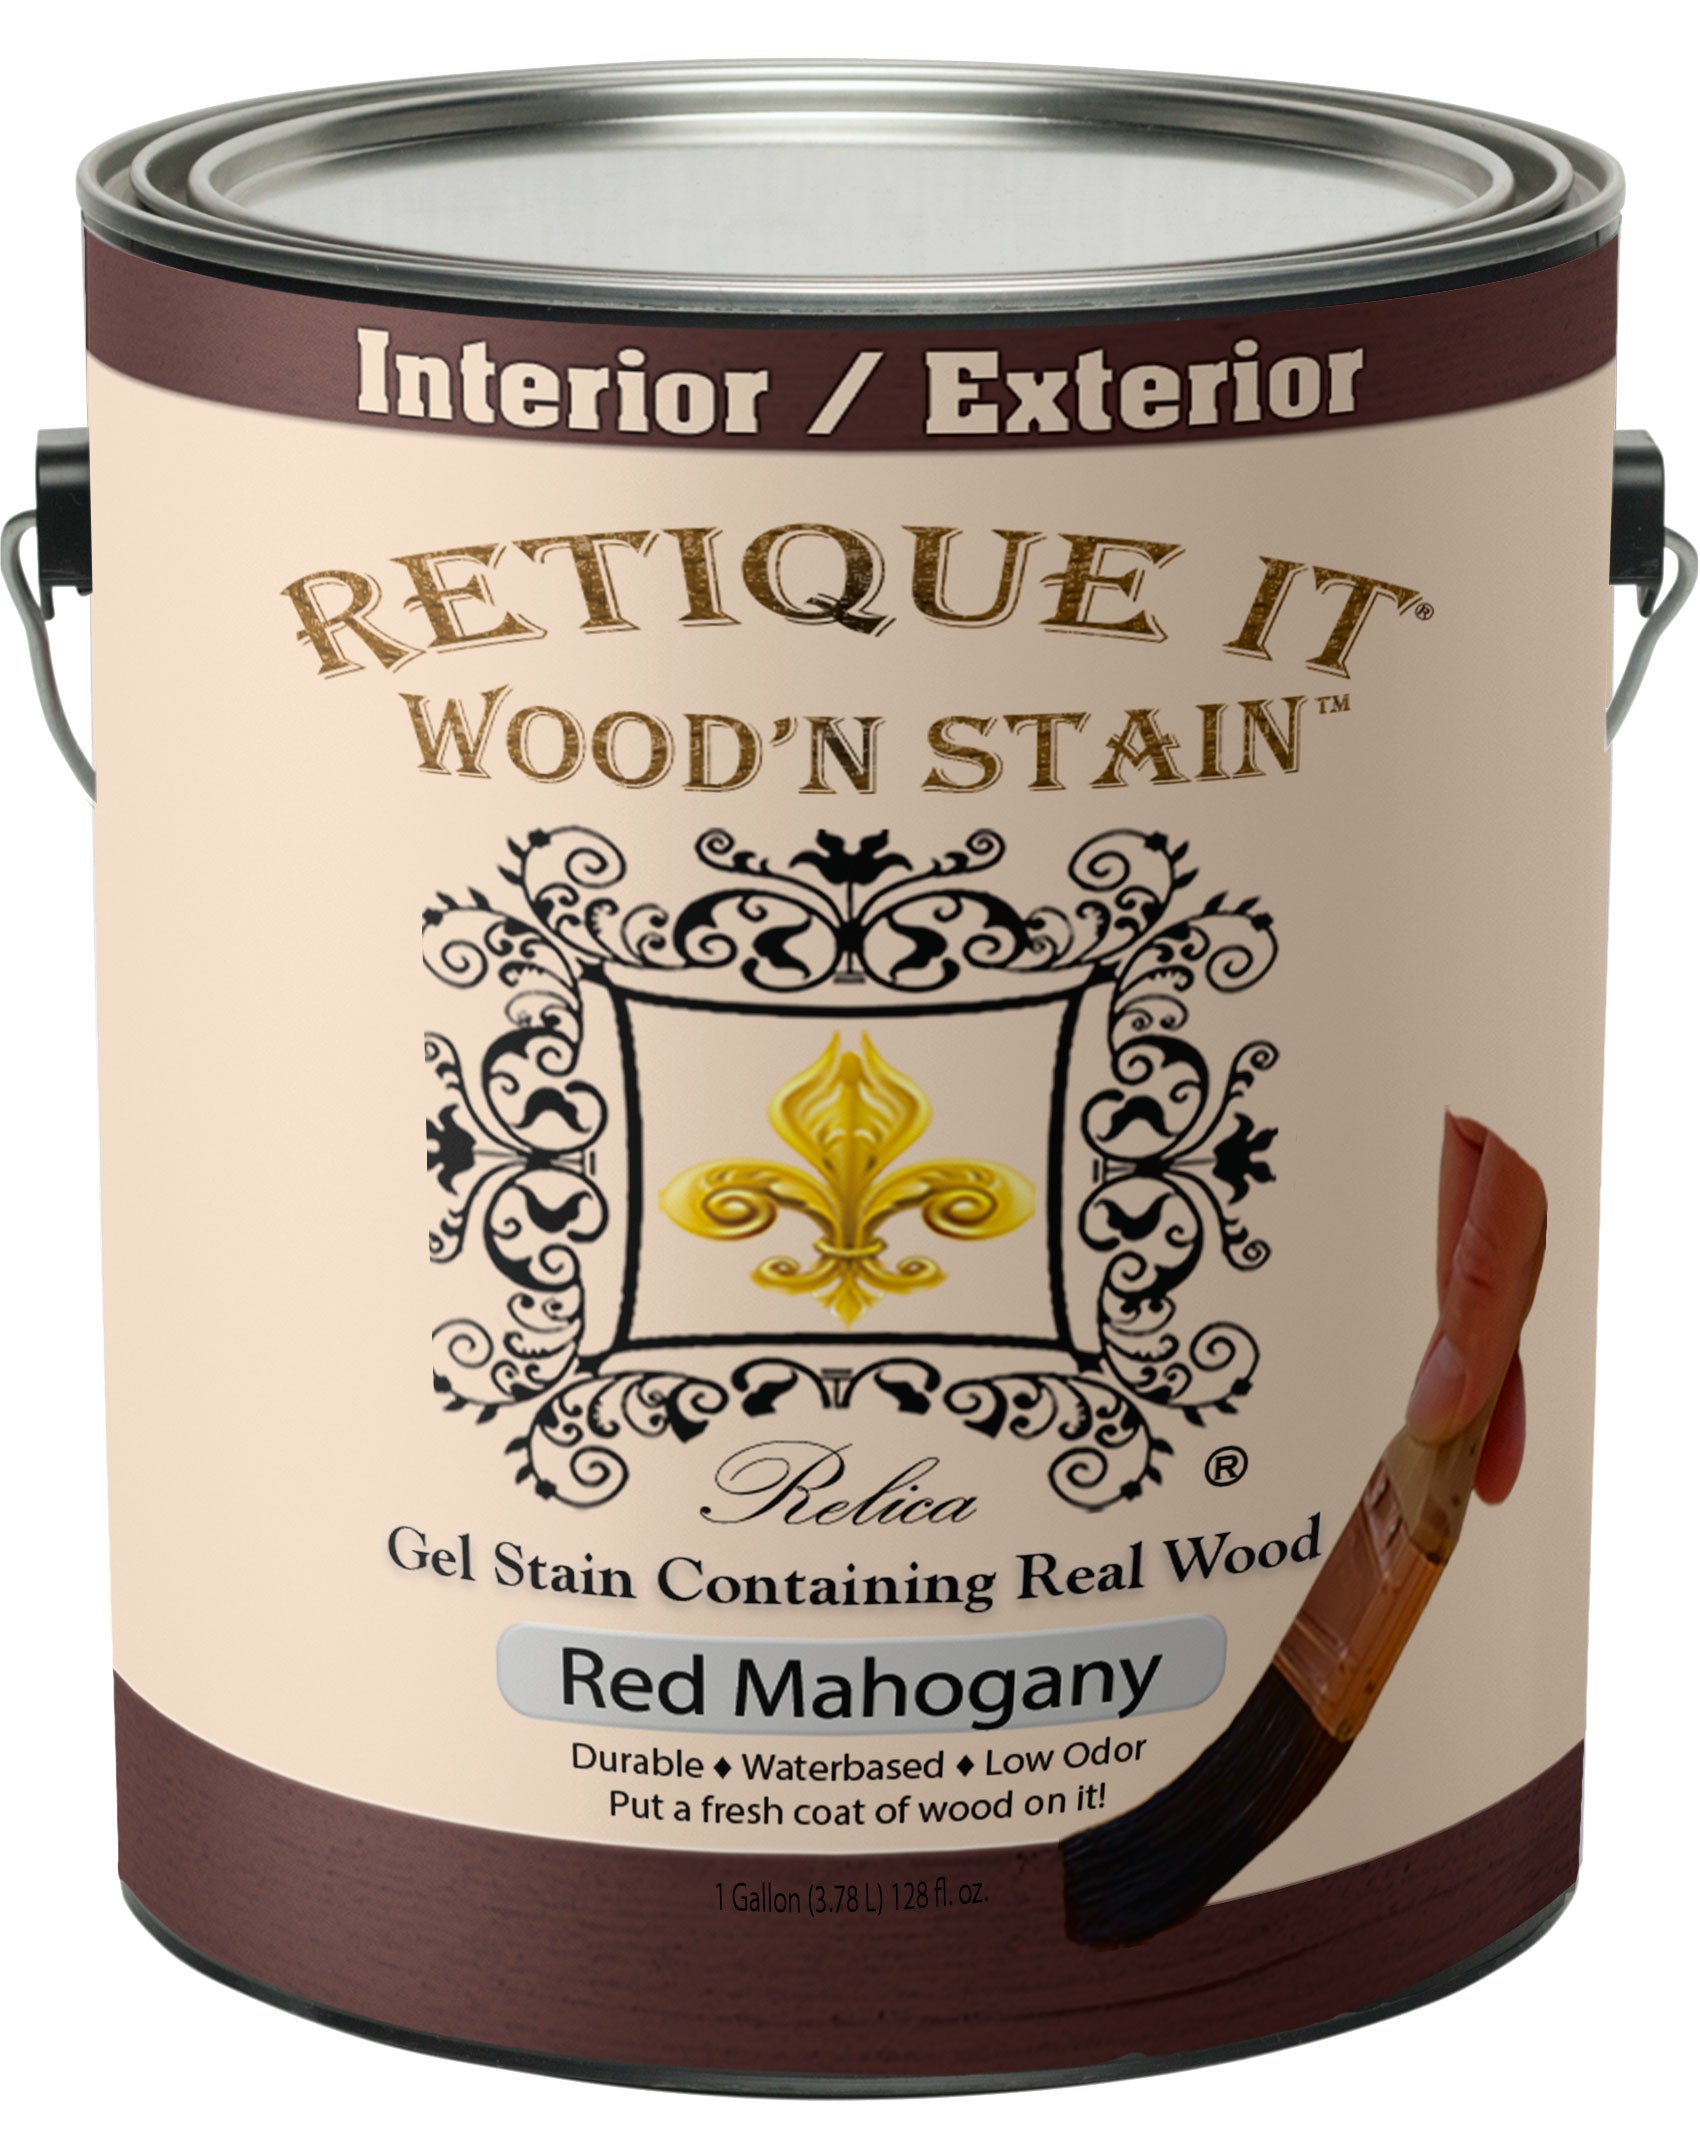 Wood'n Stain - Red Mahogany